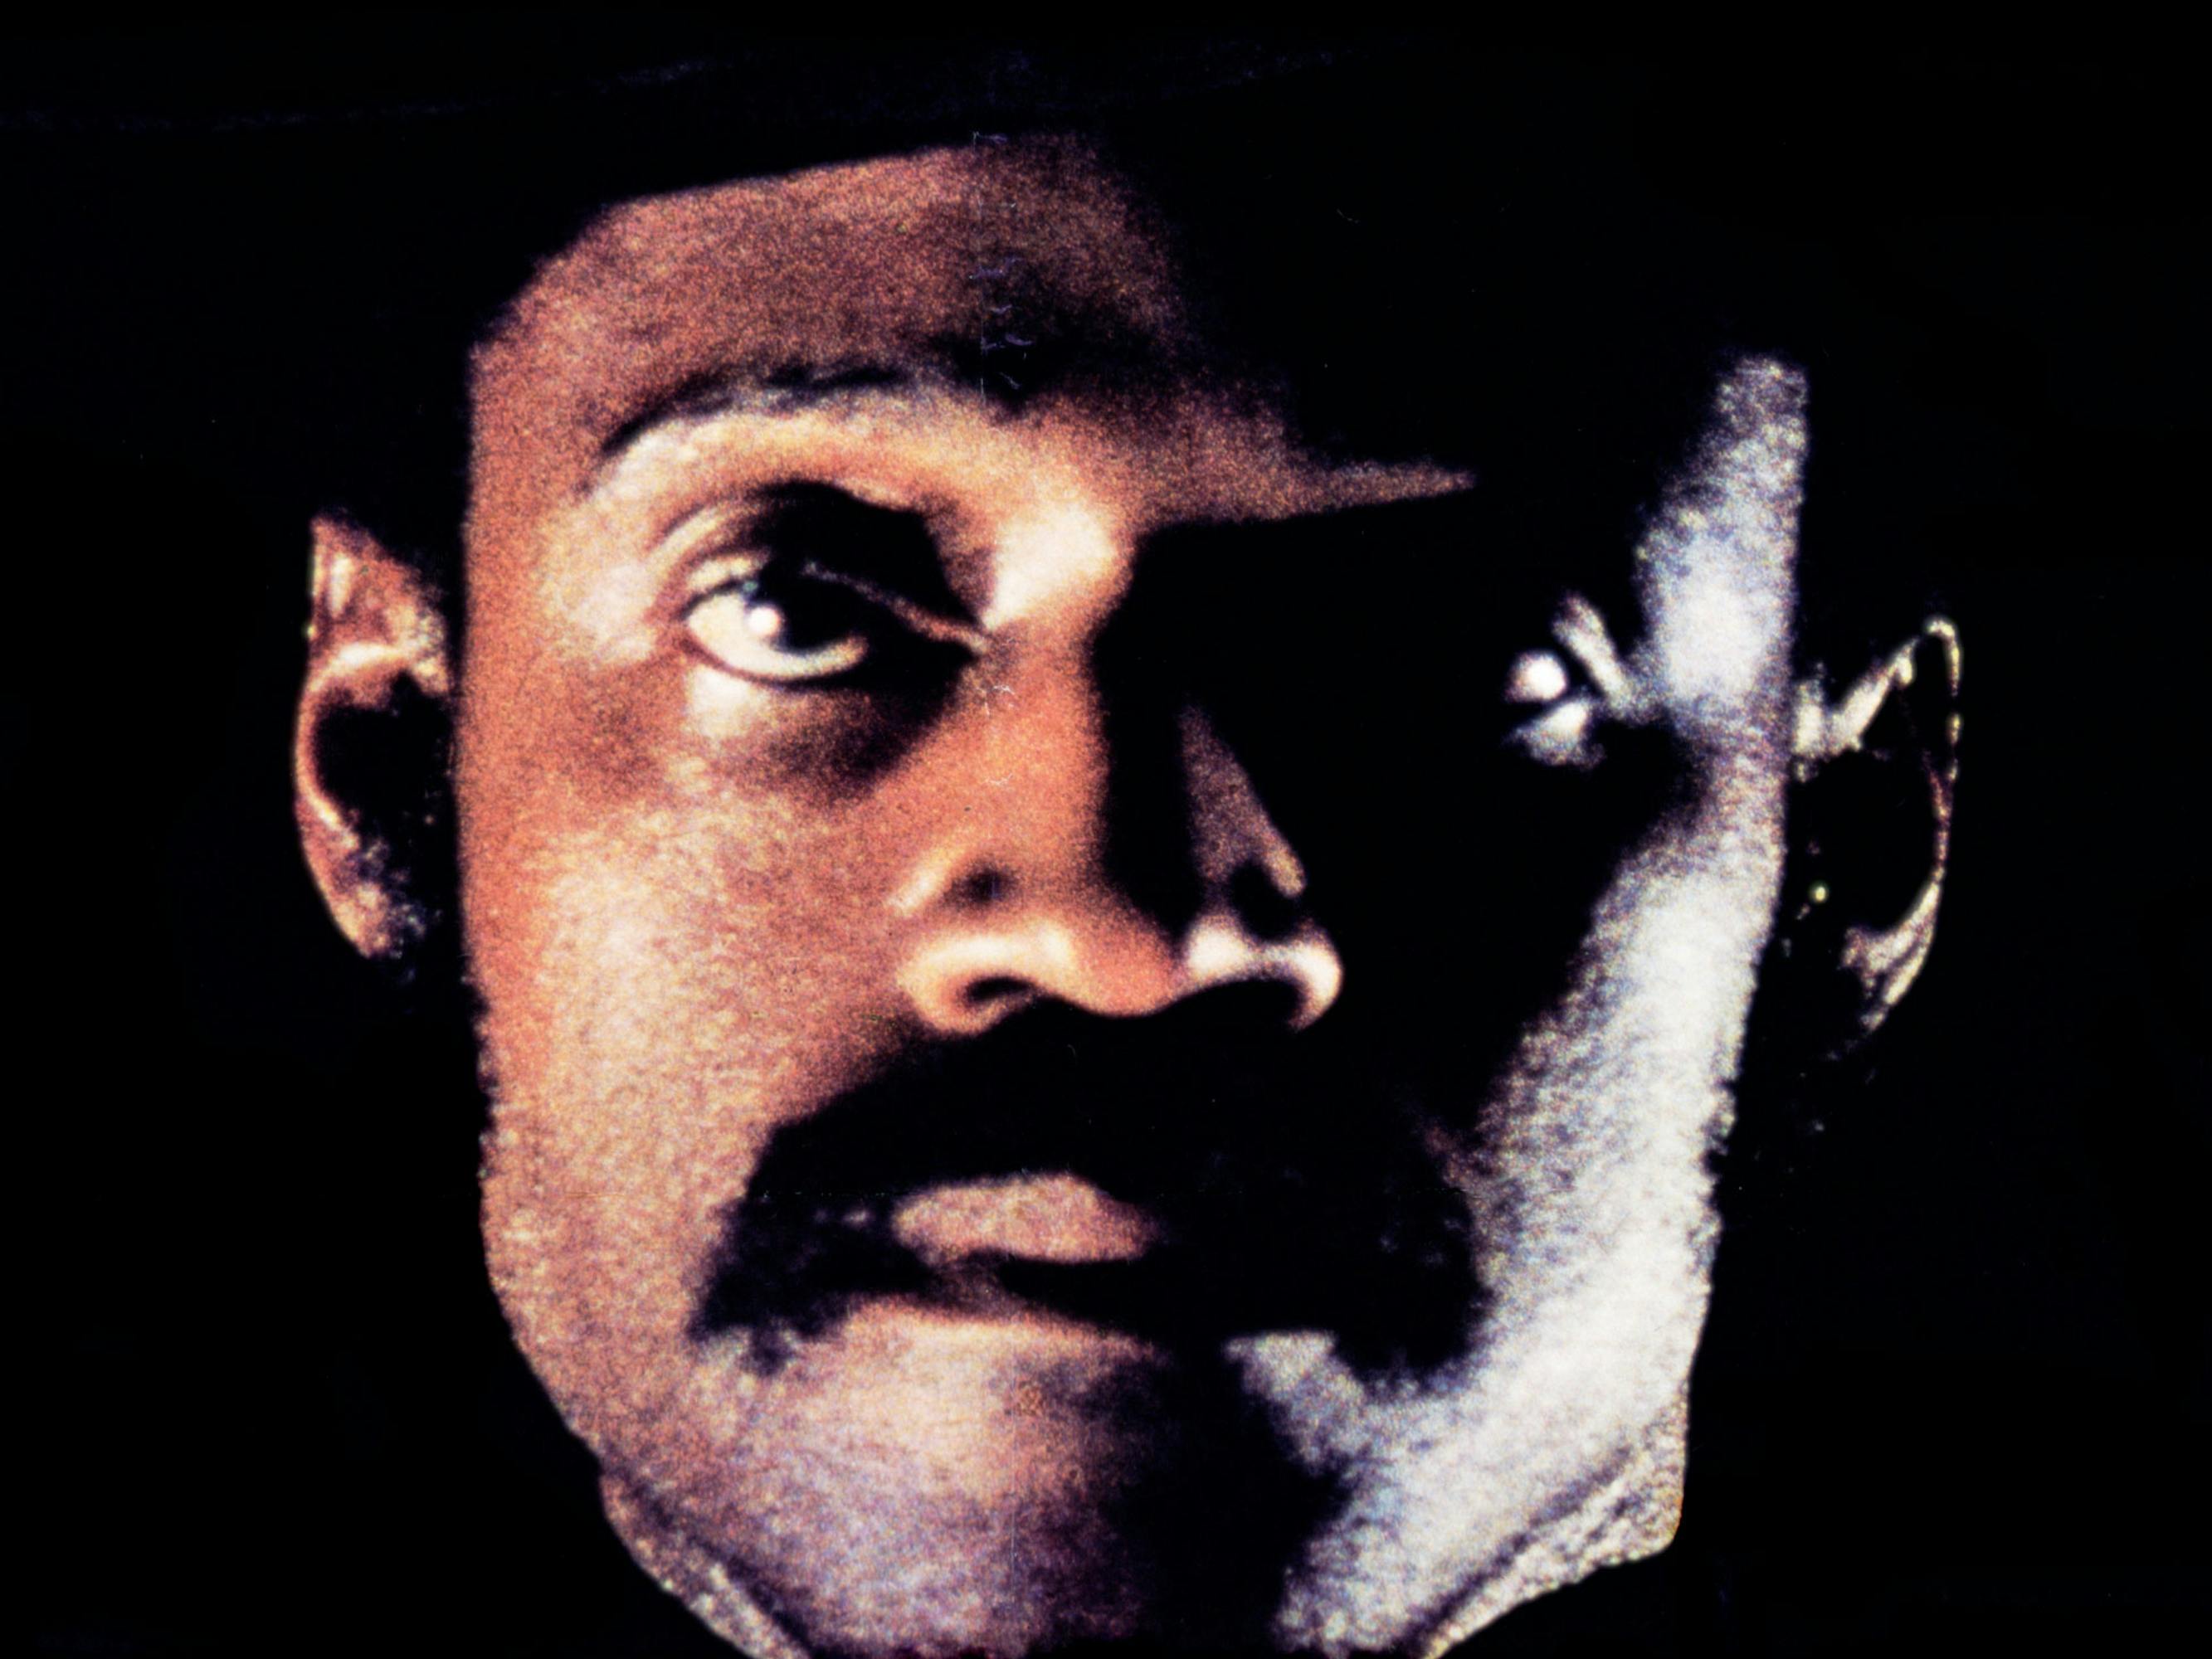 Sweetback (Melvin Van Peebles) sports an impressive mustache in the close cropped picture.